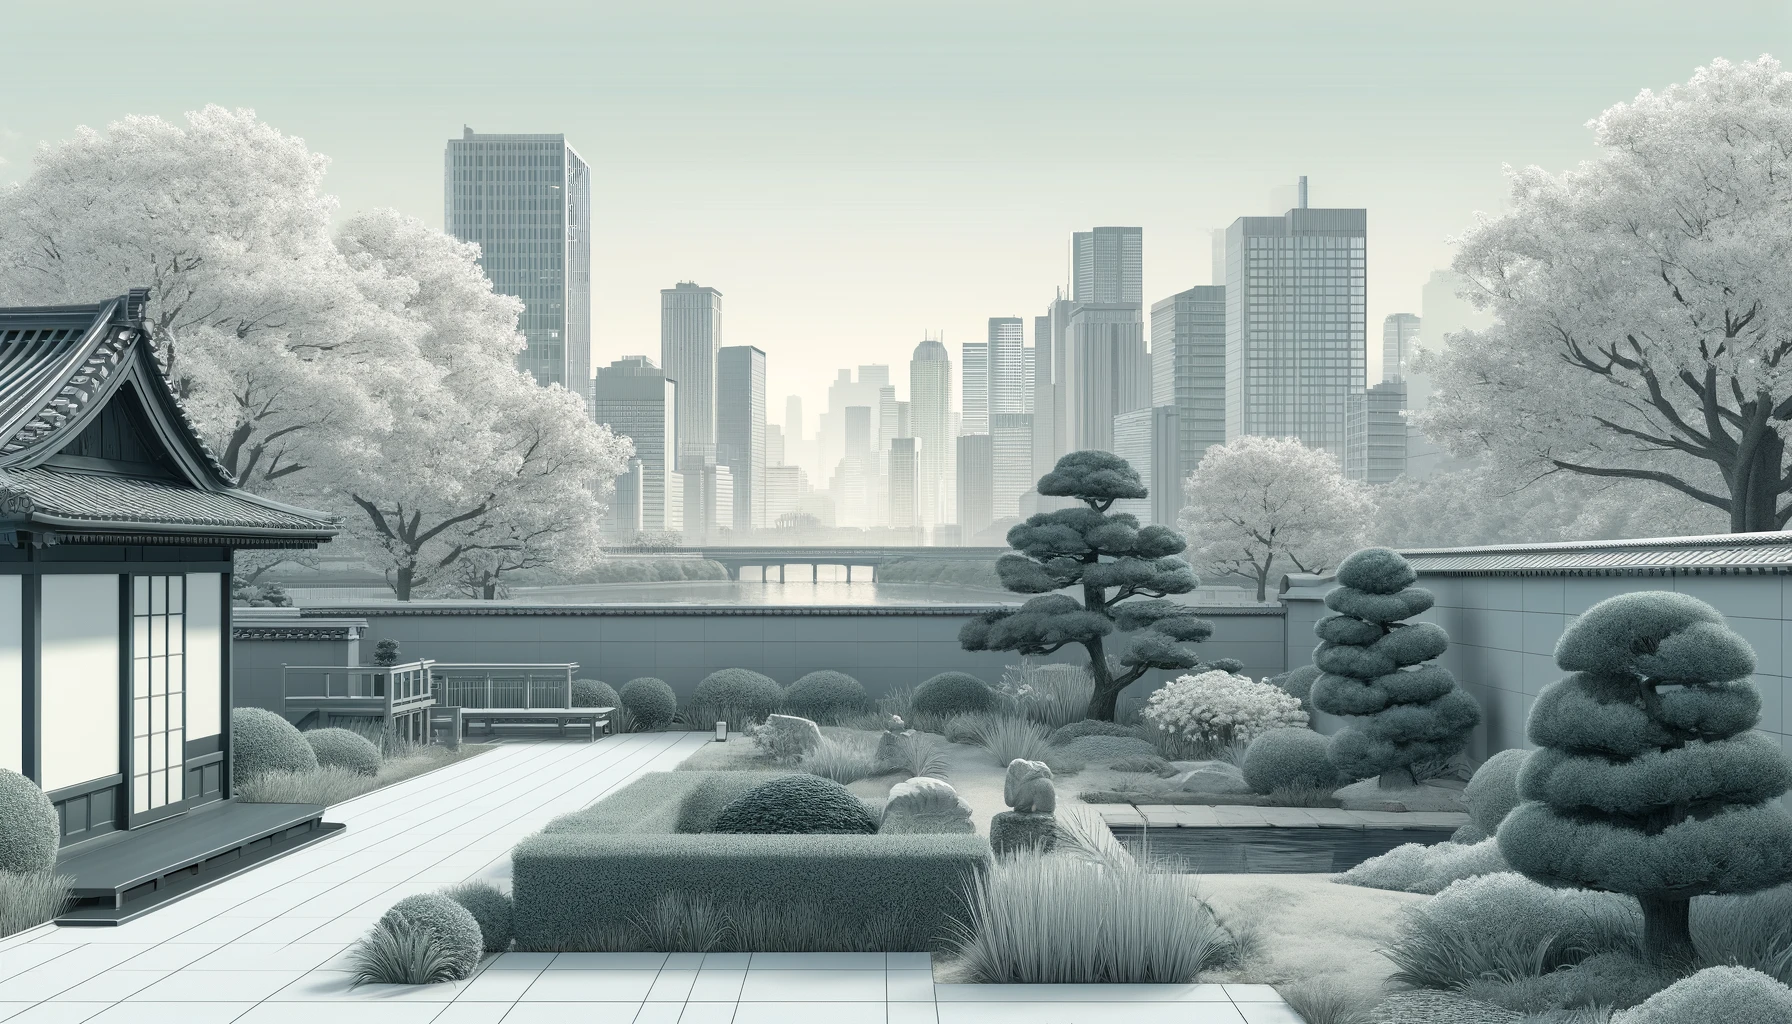 A serene landscape of modern Japan with a blend of skyscrapers and traditional elements like a koi pond and cherry blossoms, rendered in soft grays, blues, and greens.